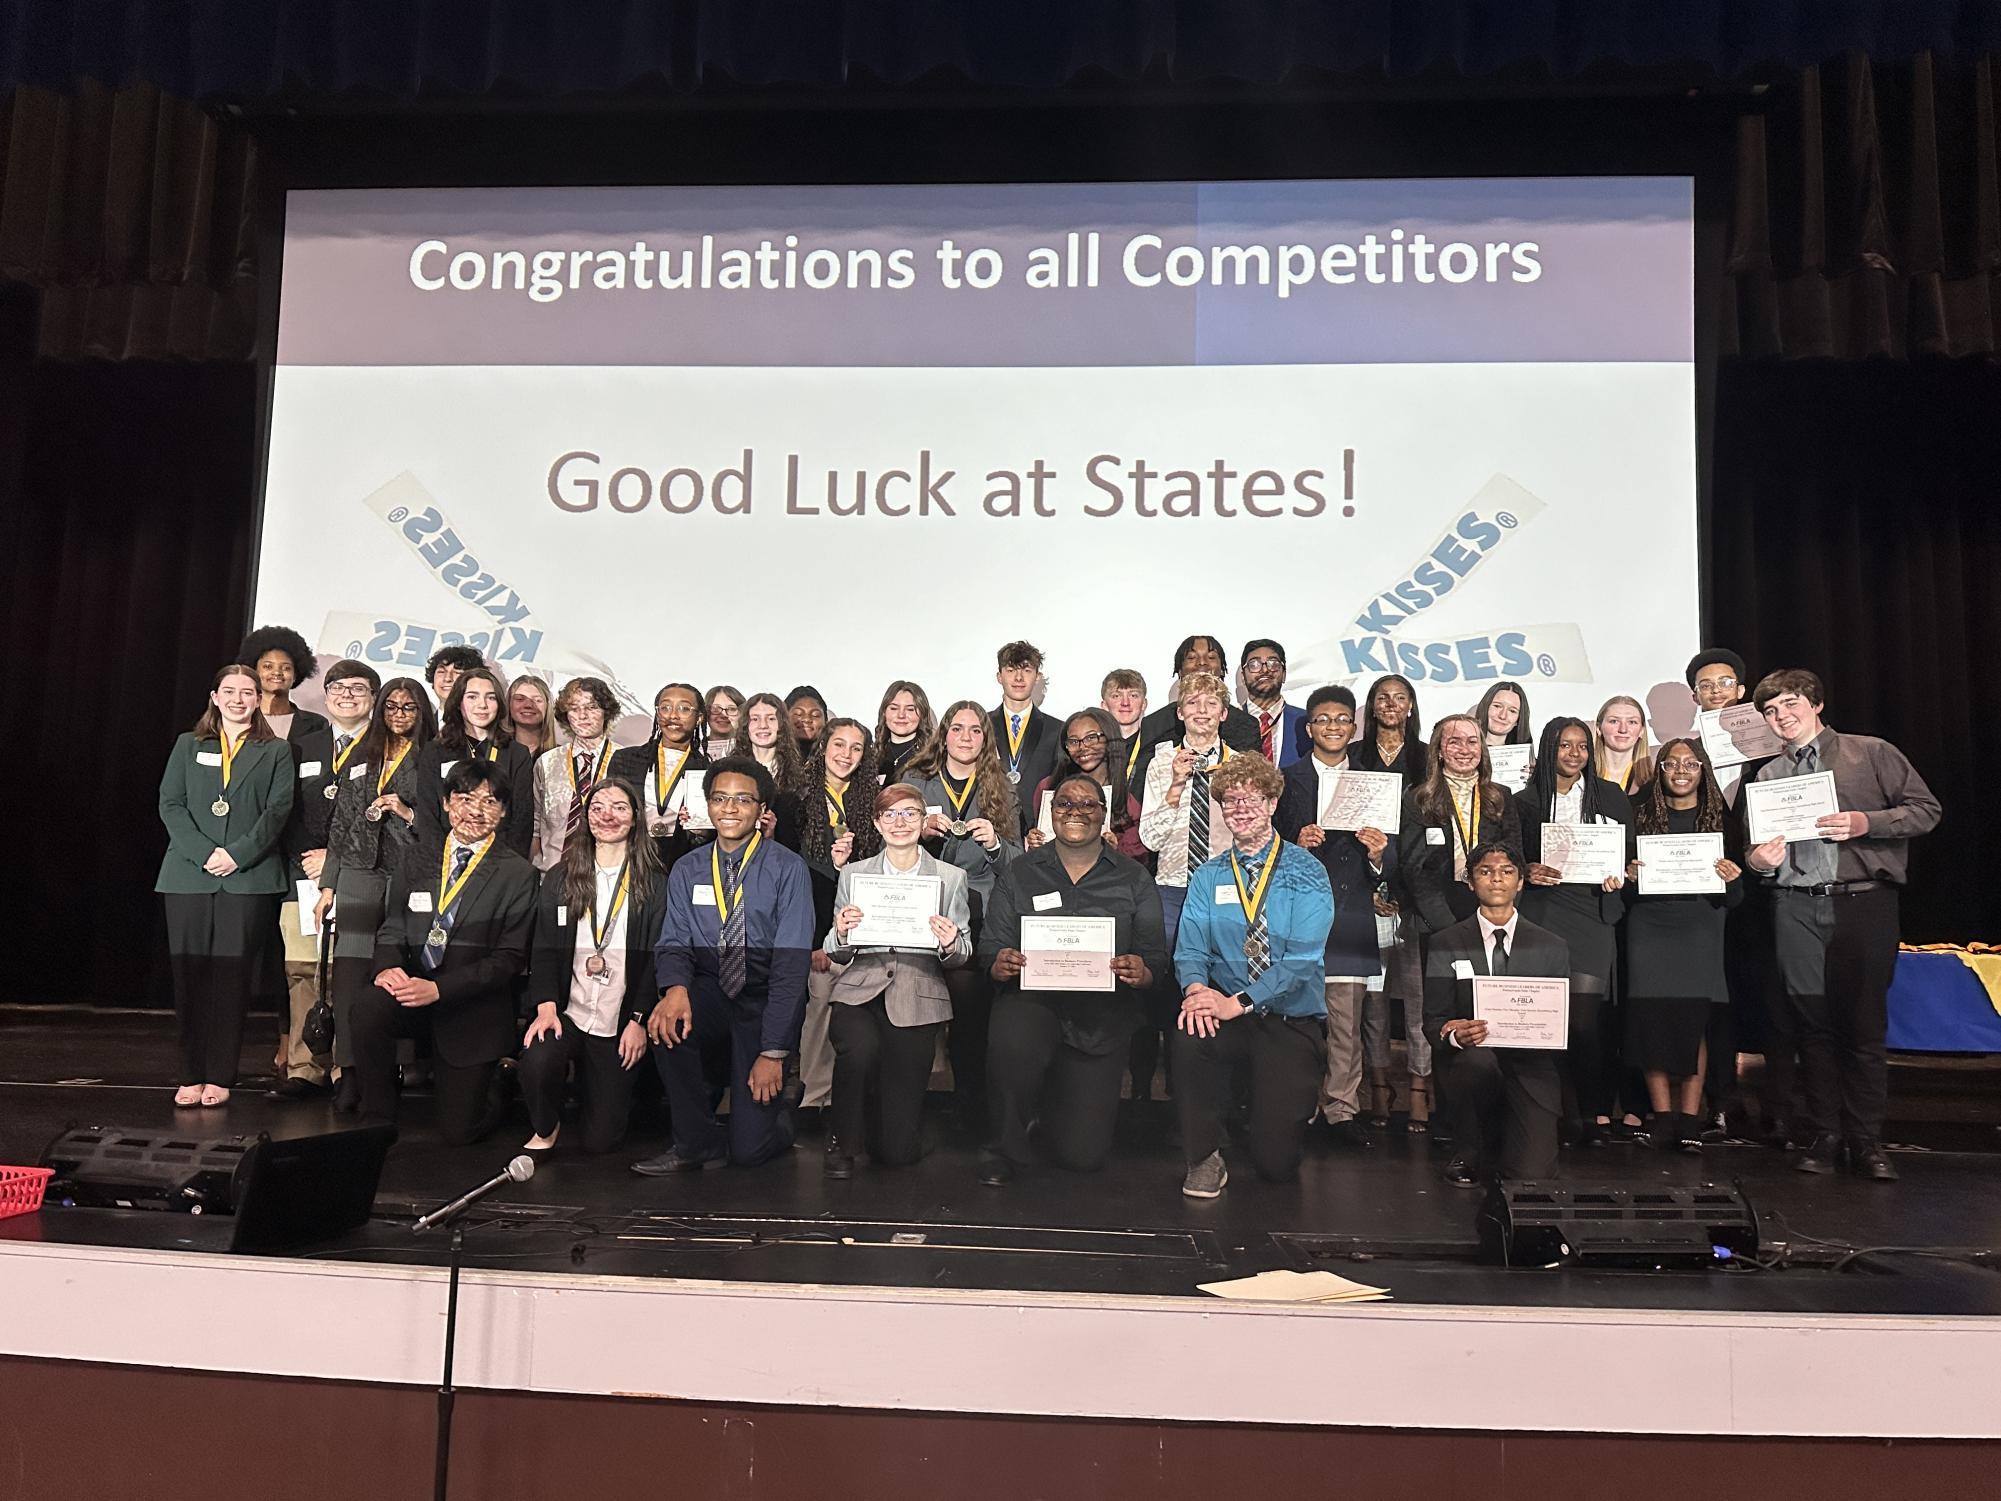 Photograph features State qualifiers at a Regional conference earlier this year